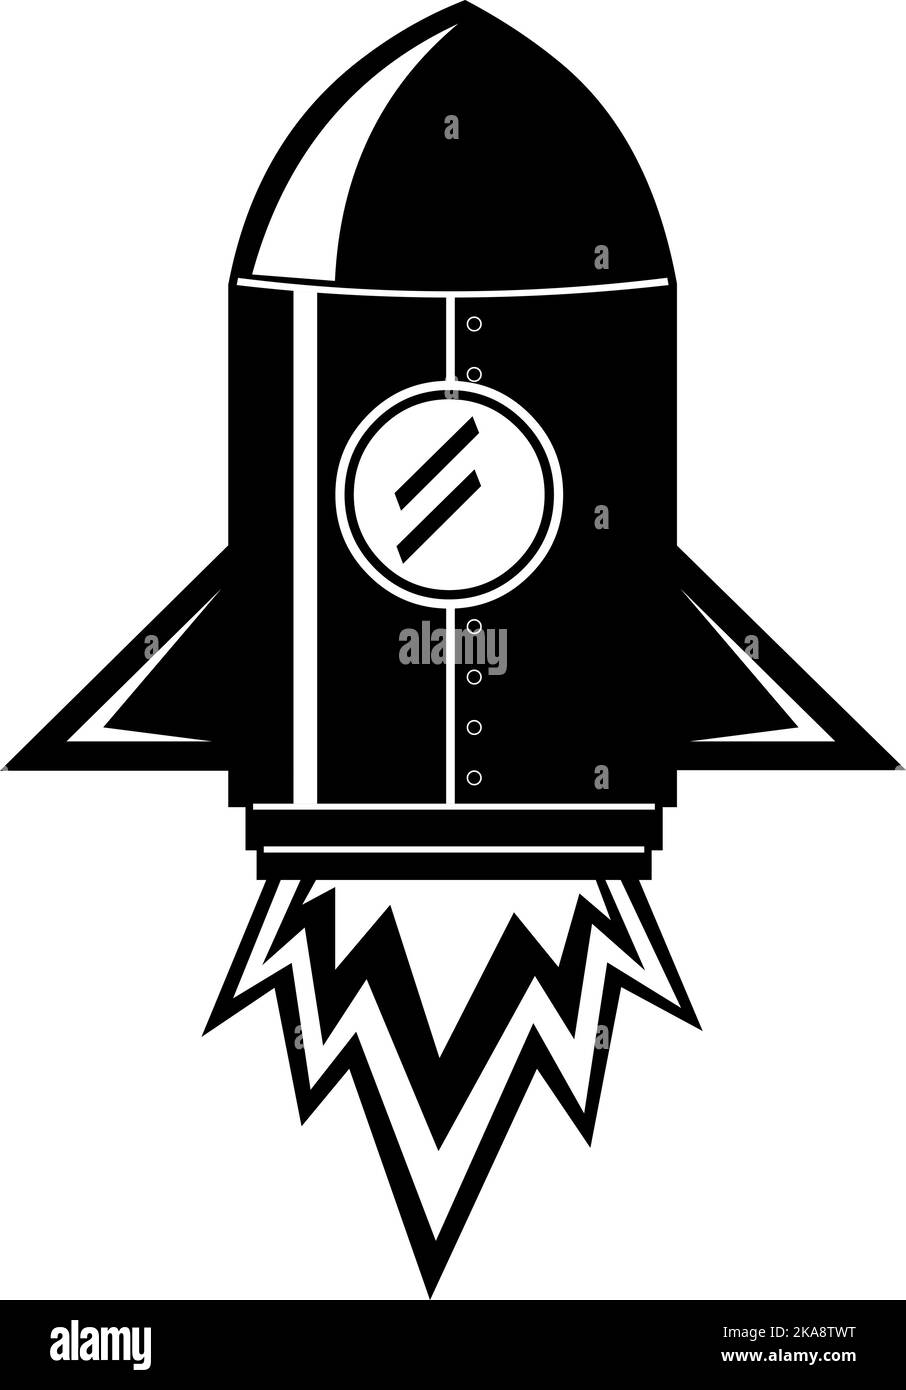 Vector illustration of icon of a space rocket drawn in black and white Stock Vector